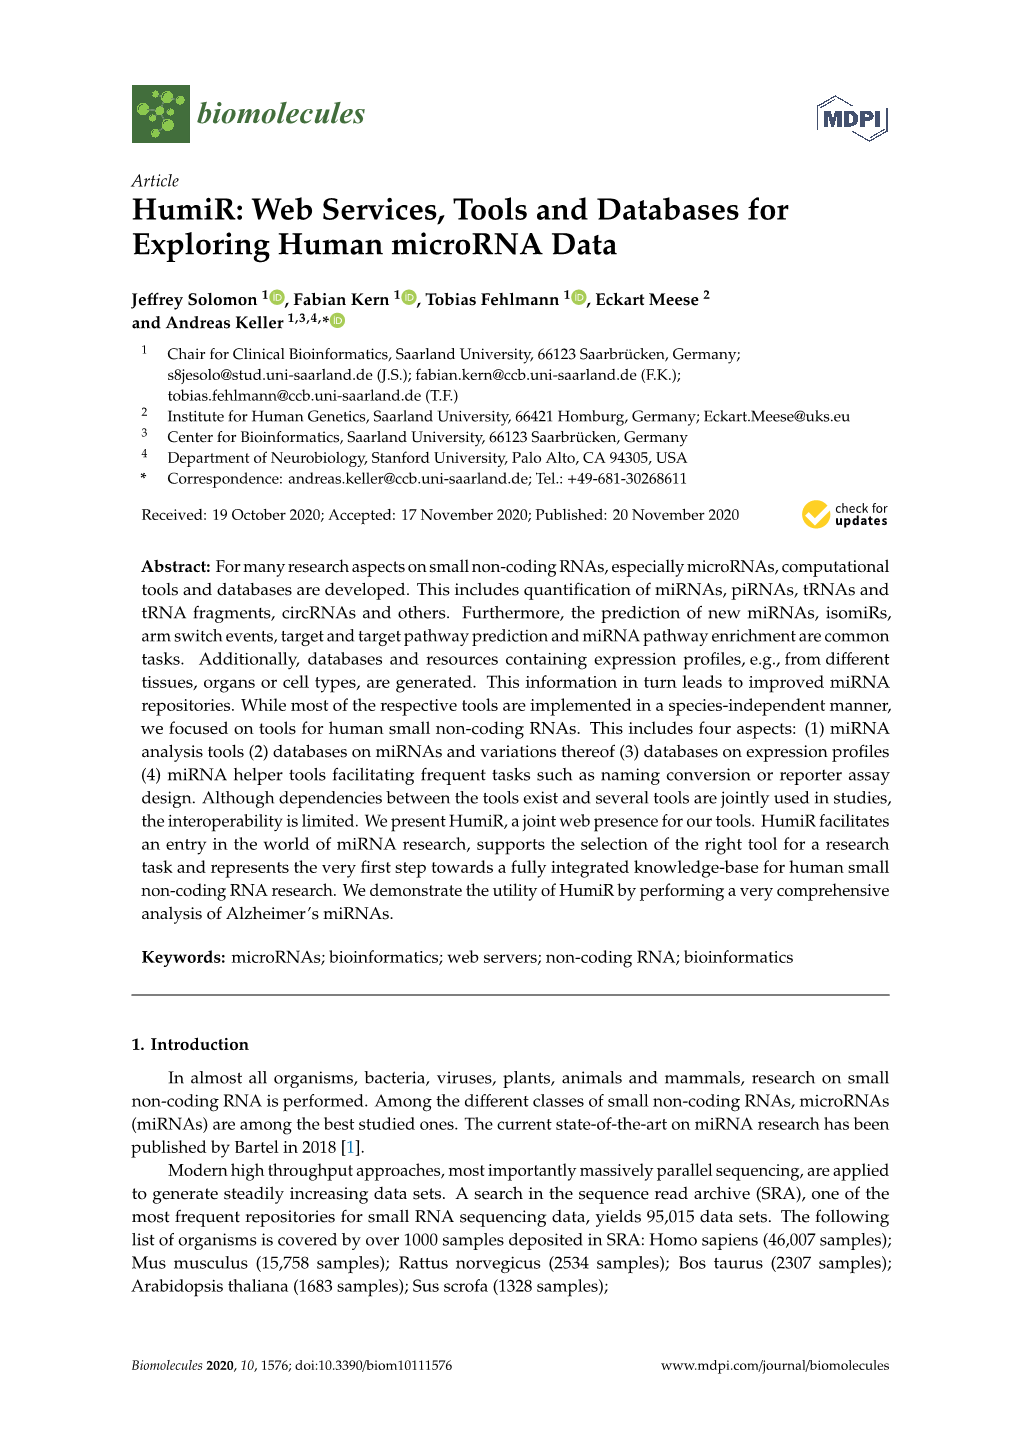 Humir: Web Services, Tools and Databases for Exploring Human Microrna Data